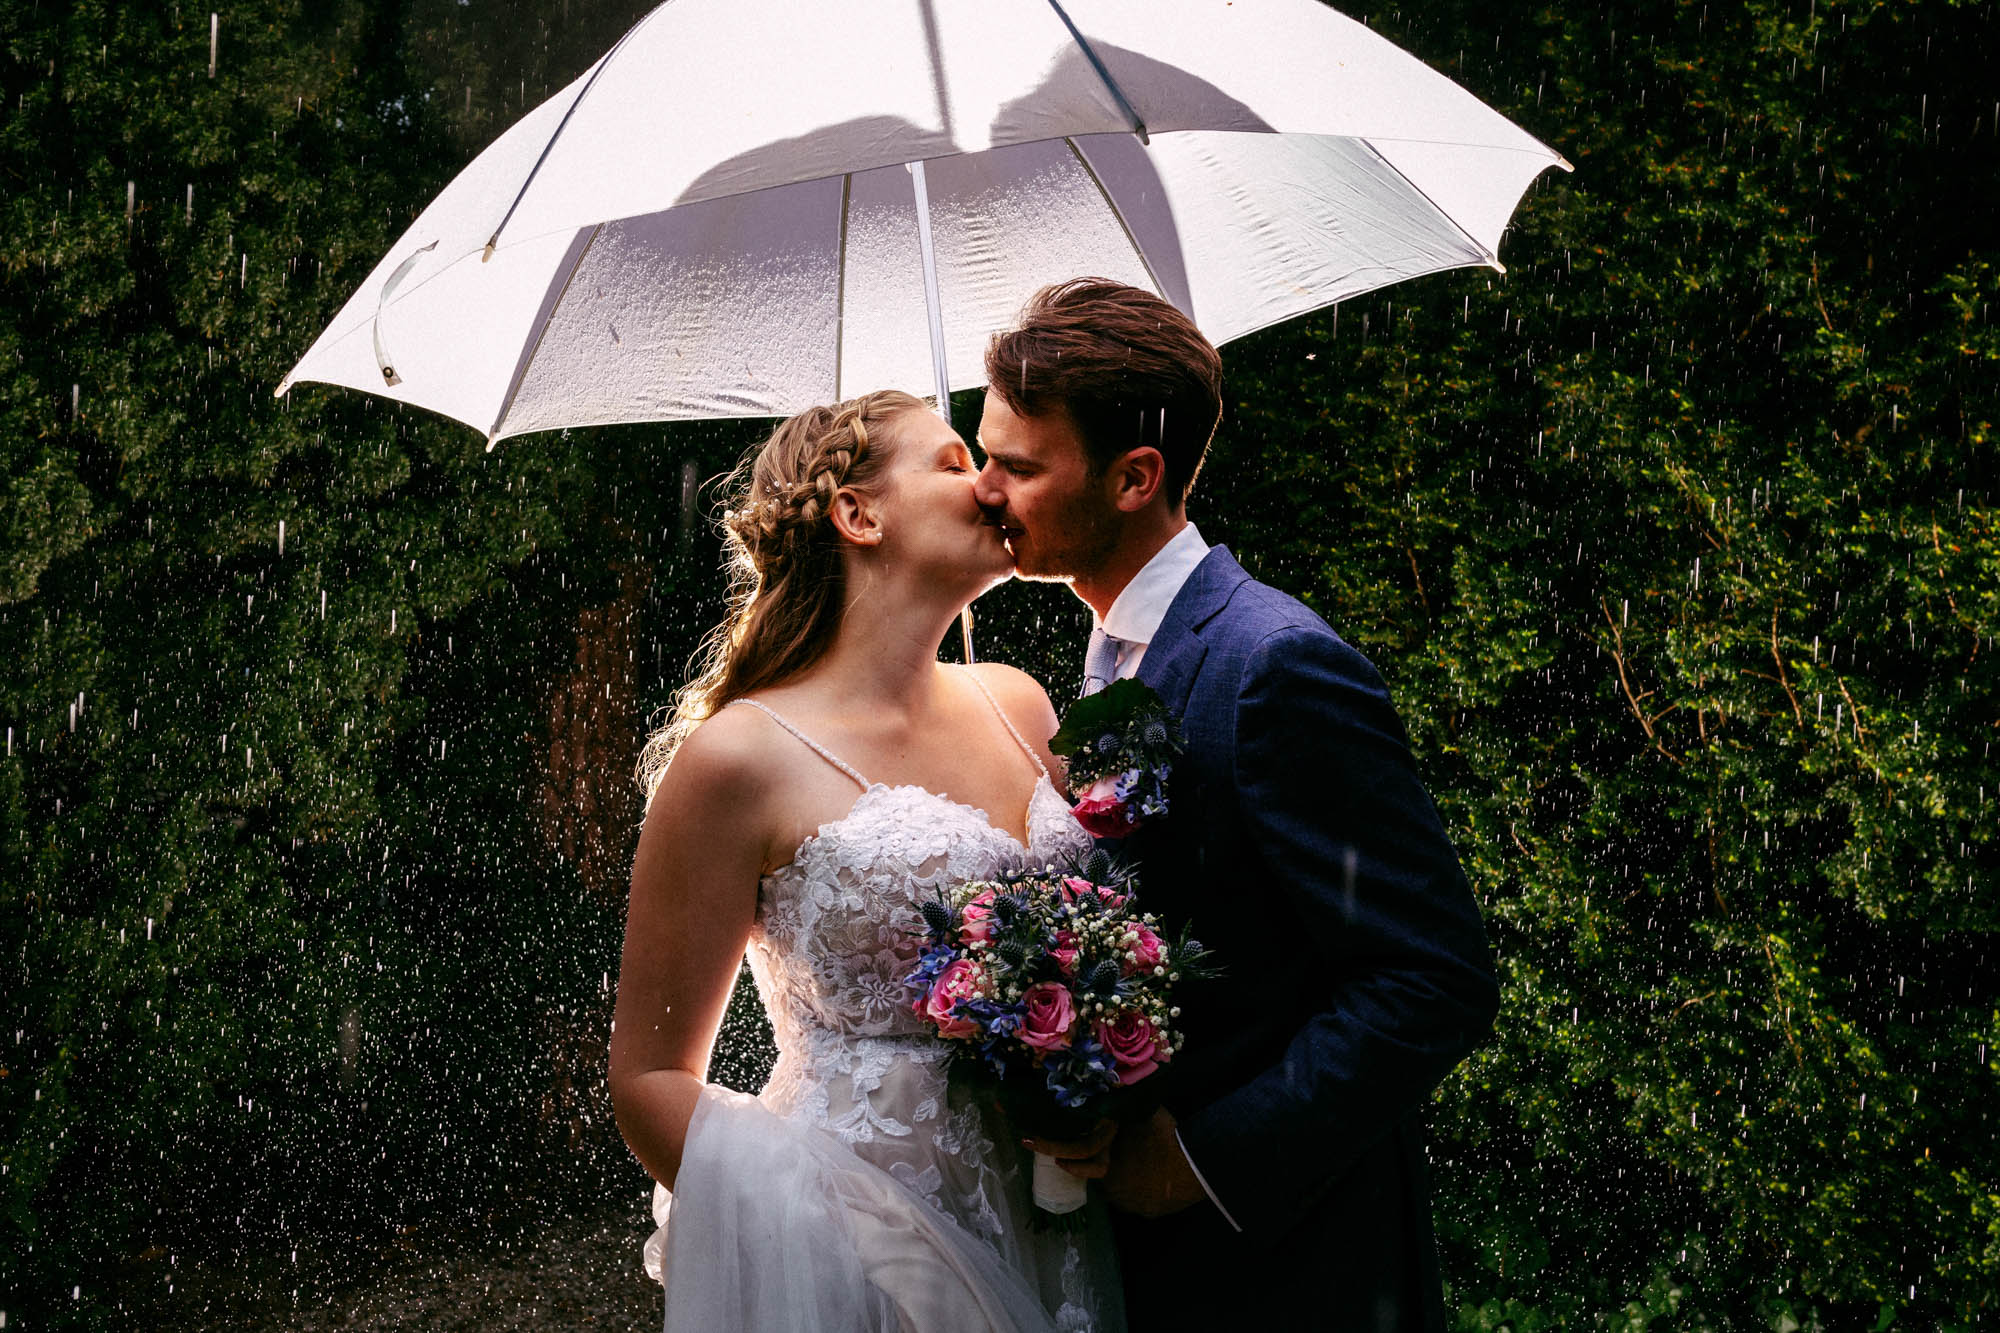 A bride and groom share a romantic kiss under an umbrella in the rain on their wedding day, experiencing the wonderful tradition of "Rain on your Wedding".